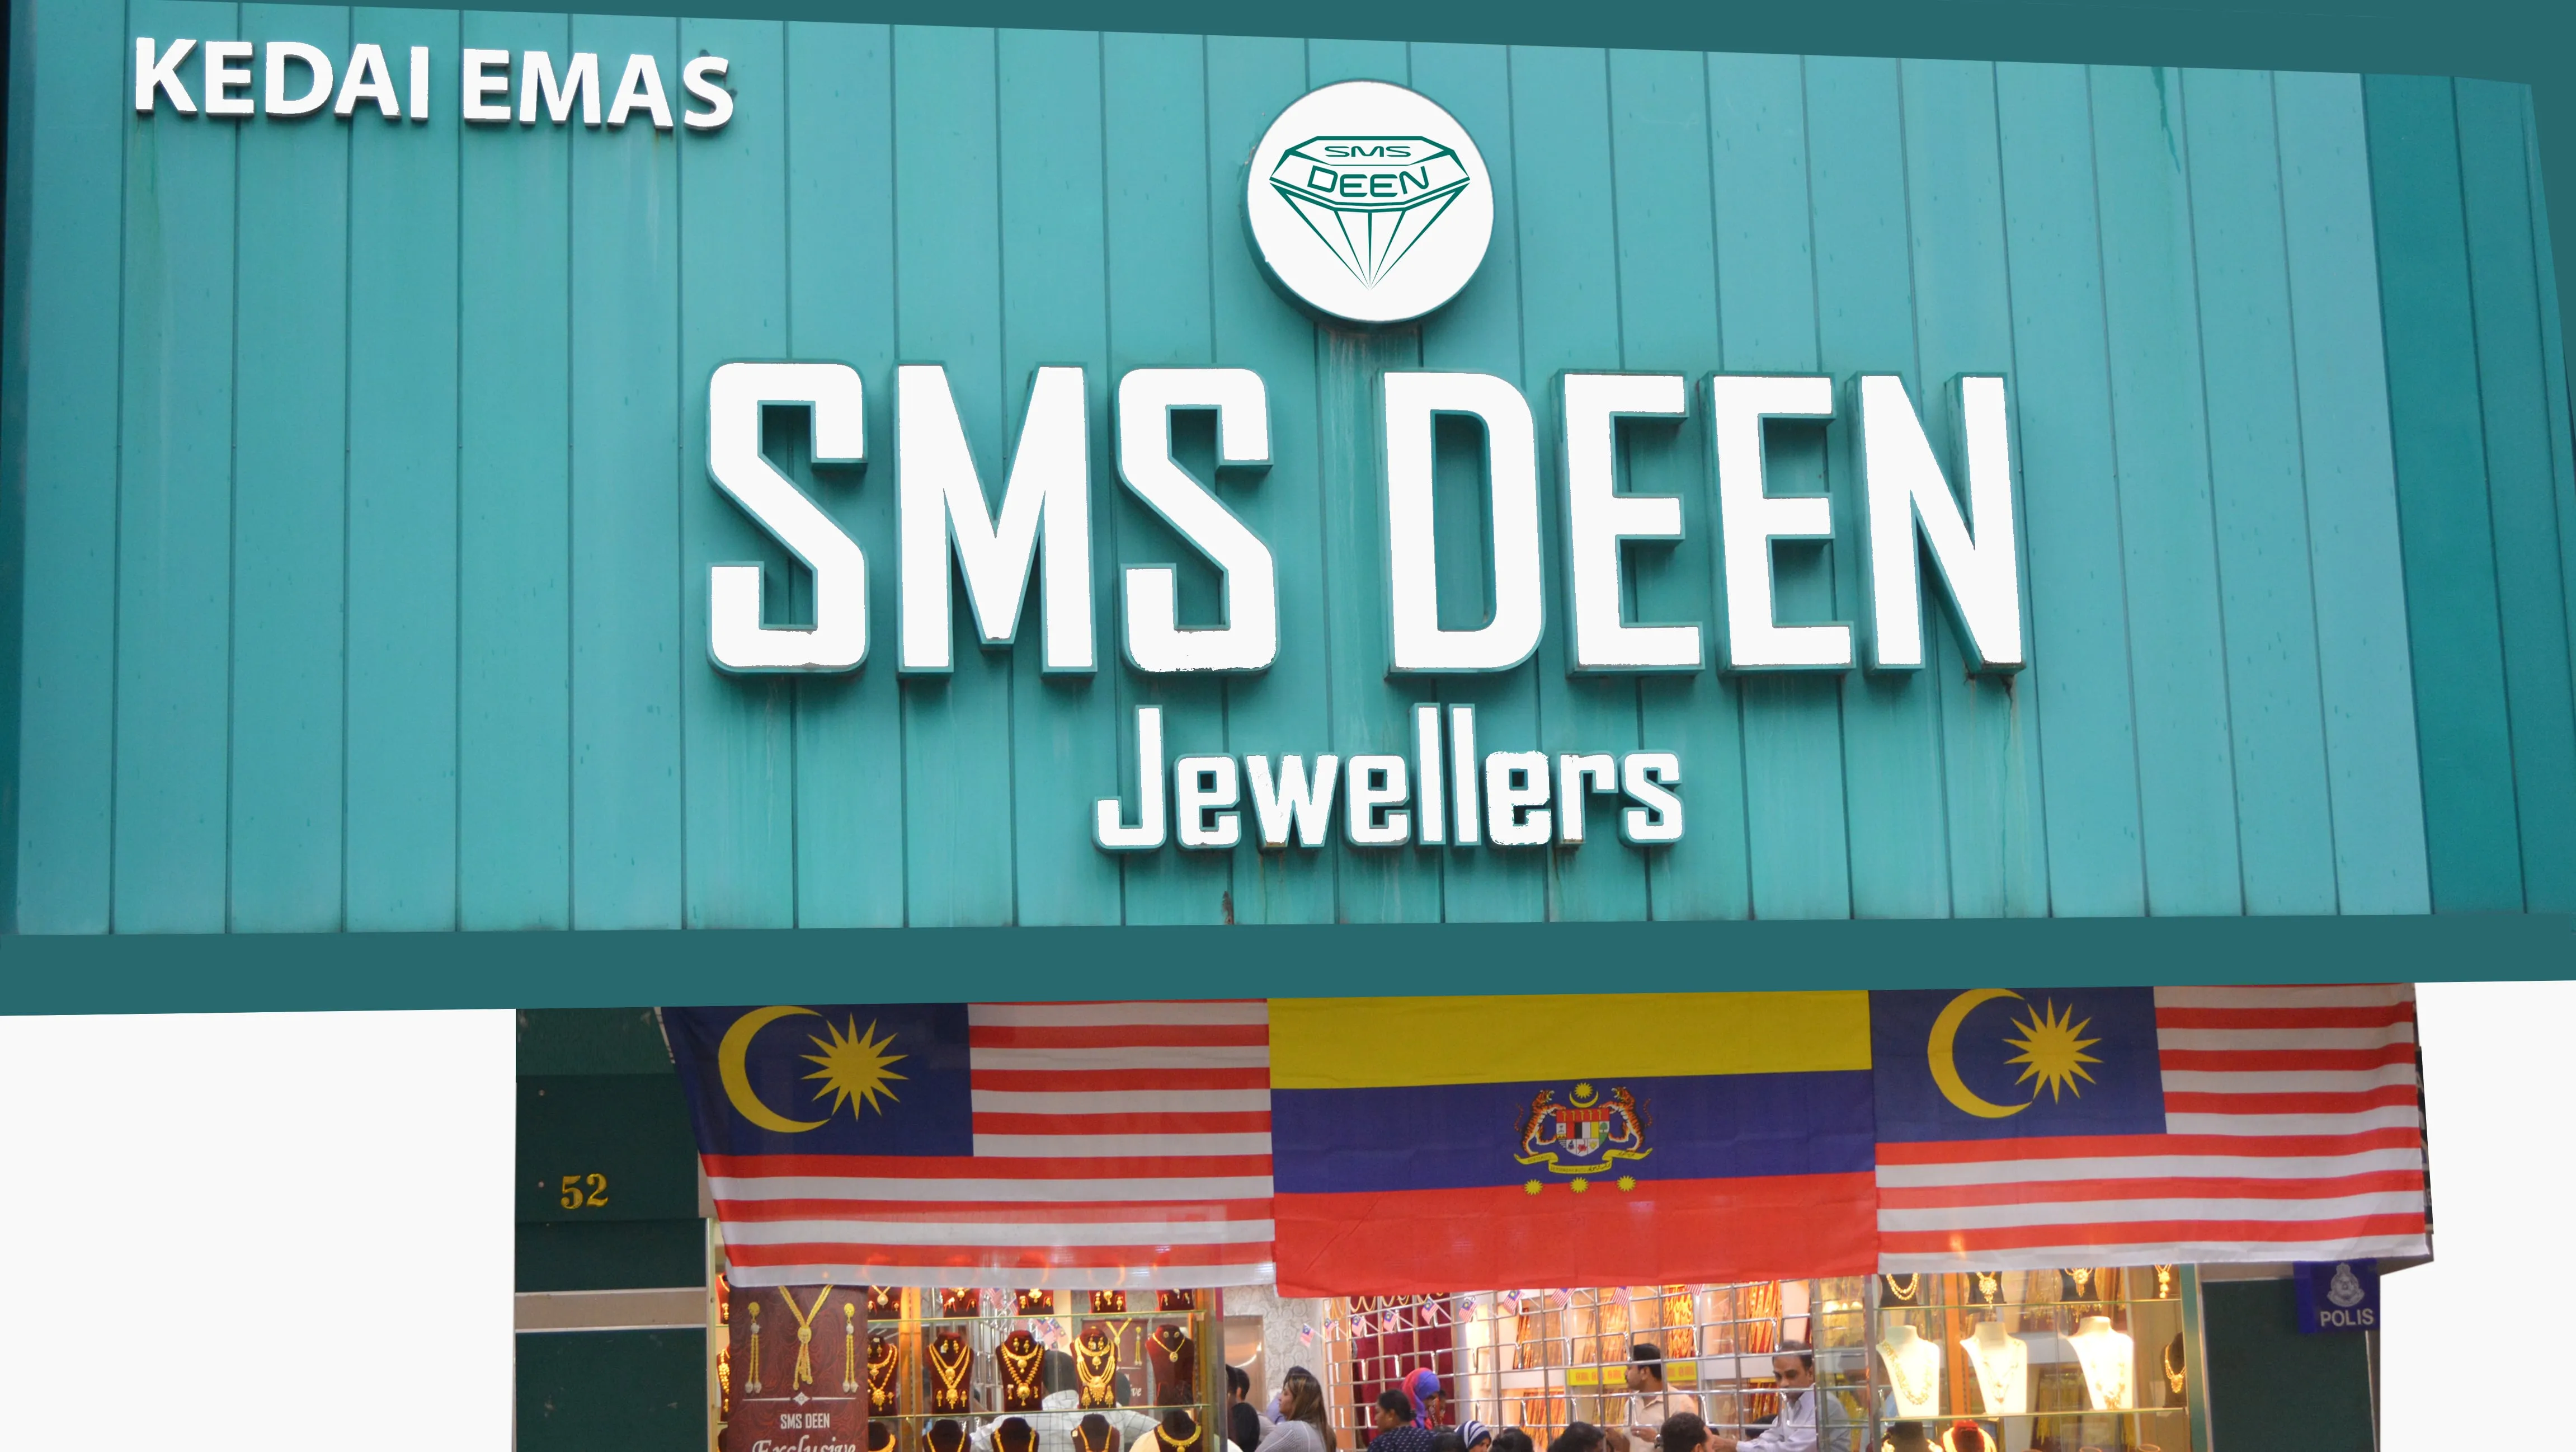 SMS Deen Jewellers in Malaysia, east_asia | Jewelry - Country Helper